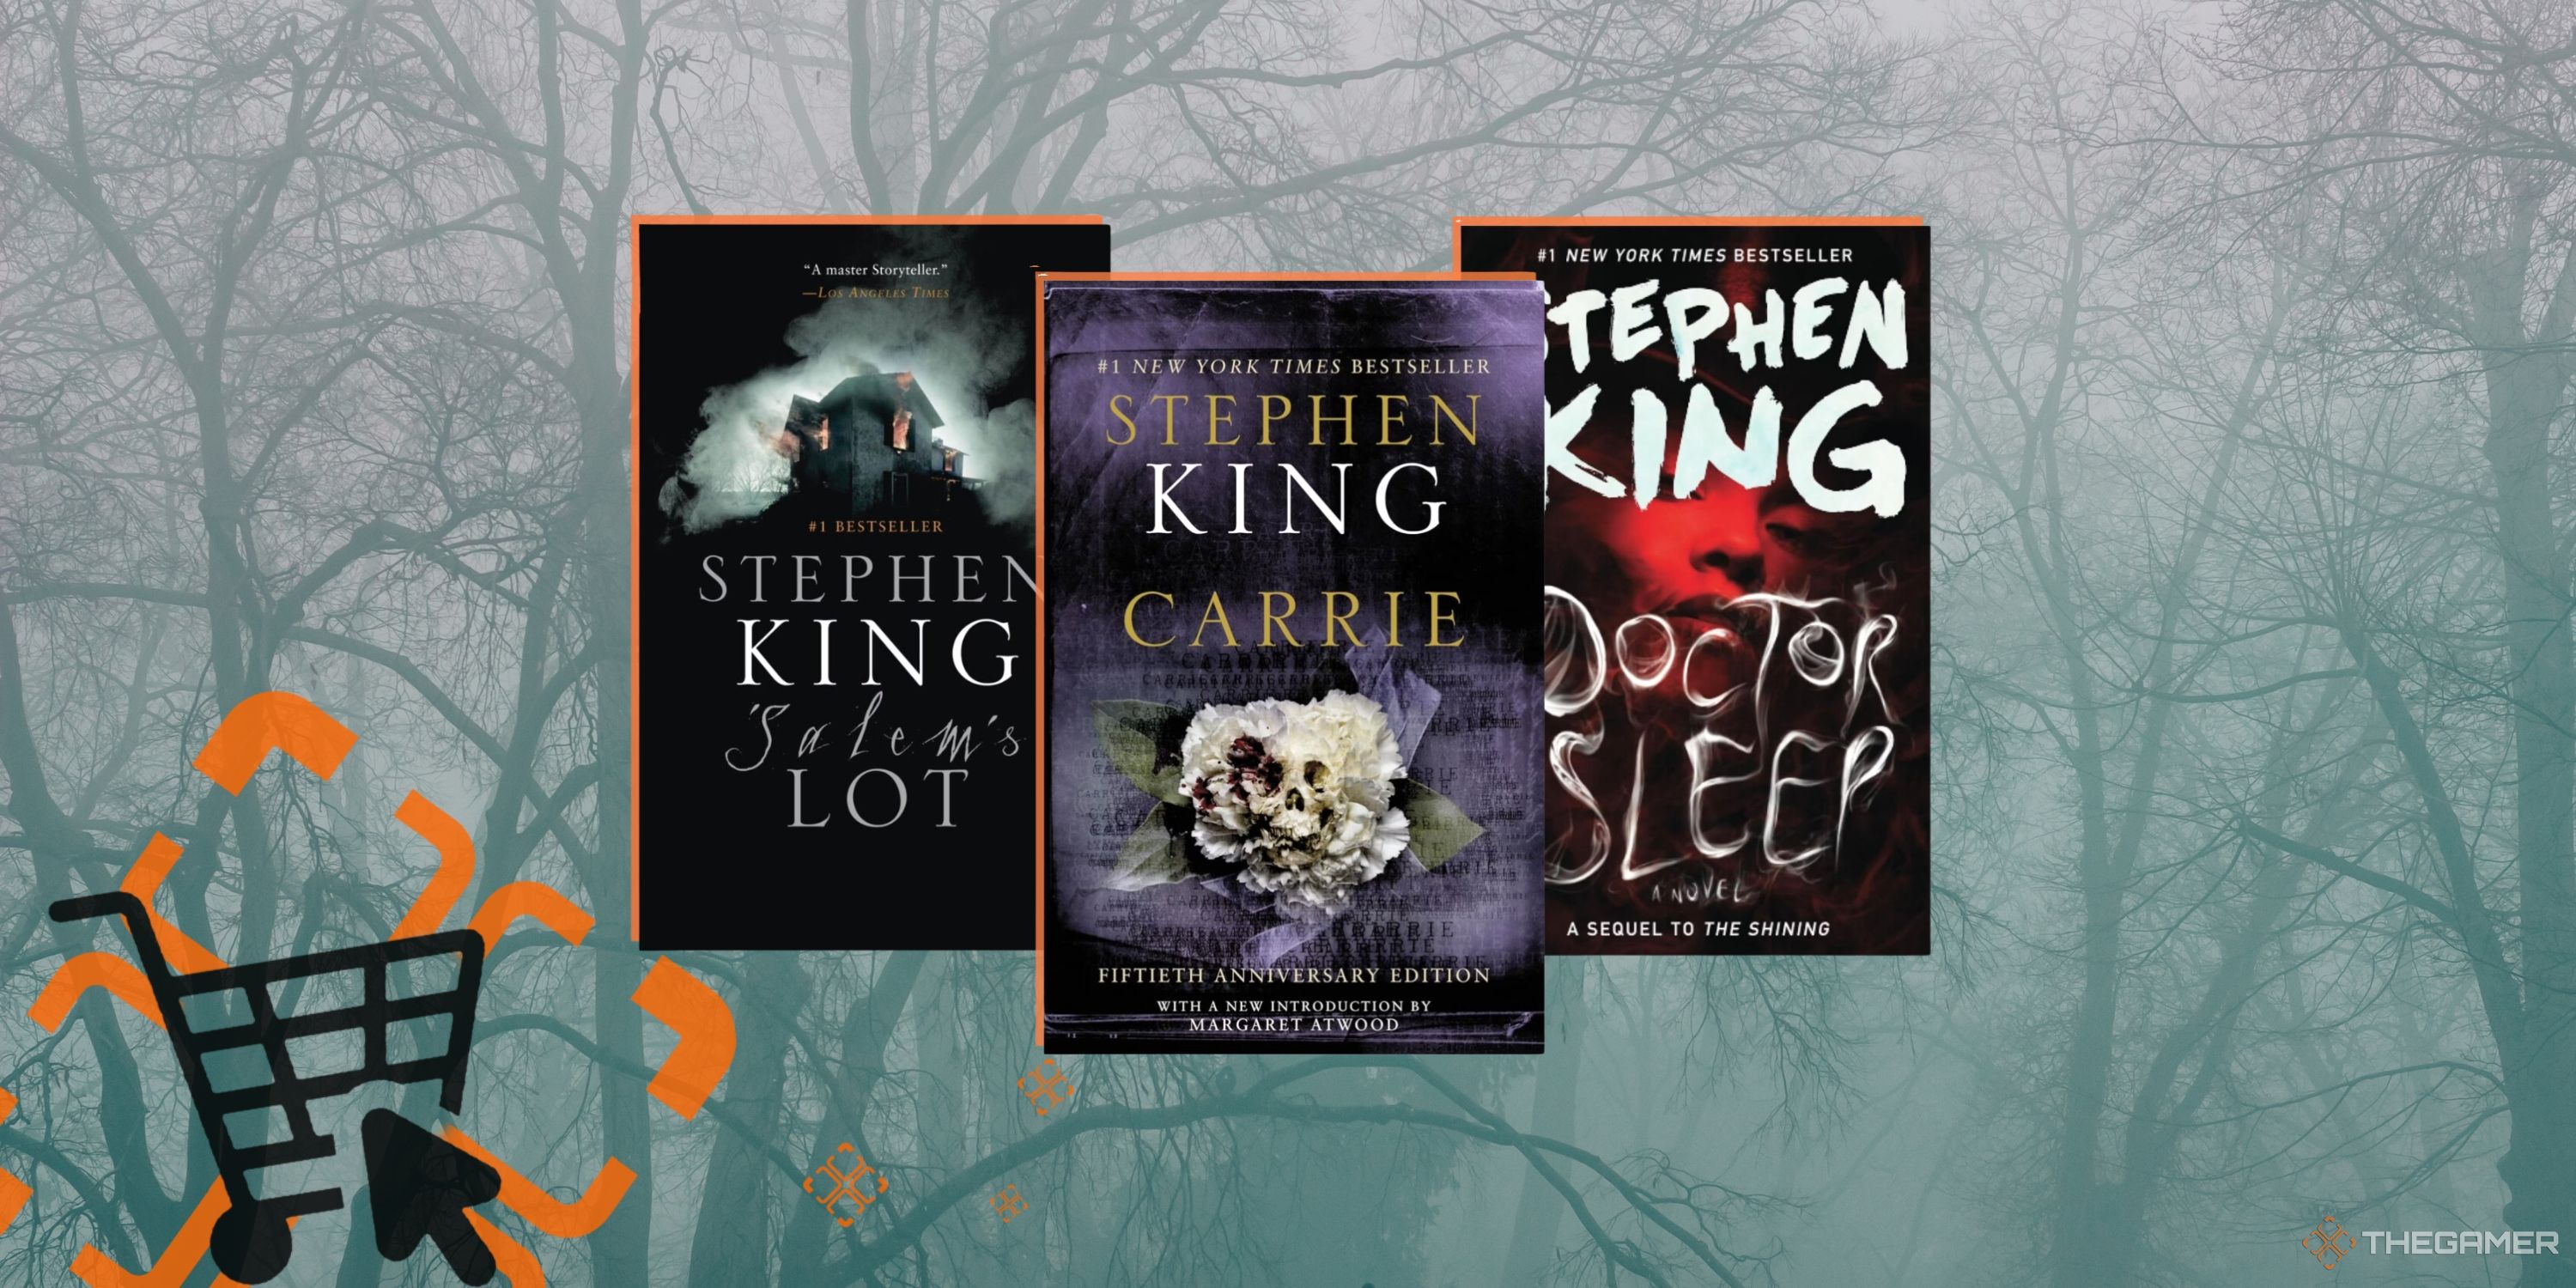 Cutouts of Stephen King Books - Salem's Lot, Carrie, and Doctor Sleep in front of a spooky forest background